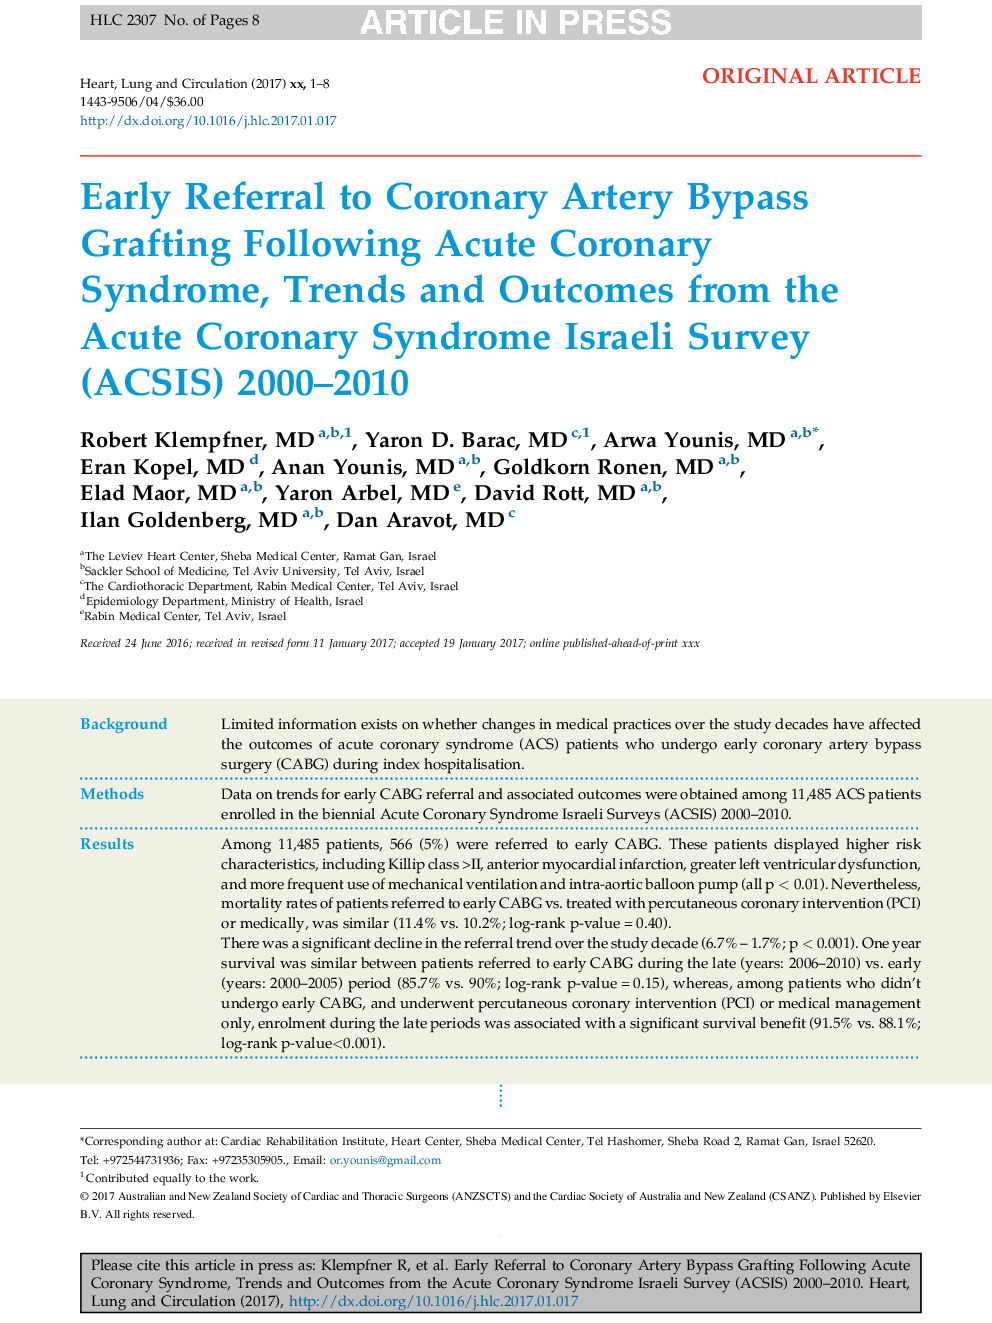 Early Referral to Coronary Artery Bypass Grafting Following Acute Coronary Syndrome, Trends and Outcomes from the Acute Coronary Syndrome Israeli Survey (ACSIS) 2000-2010